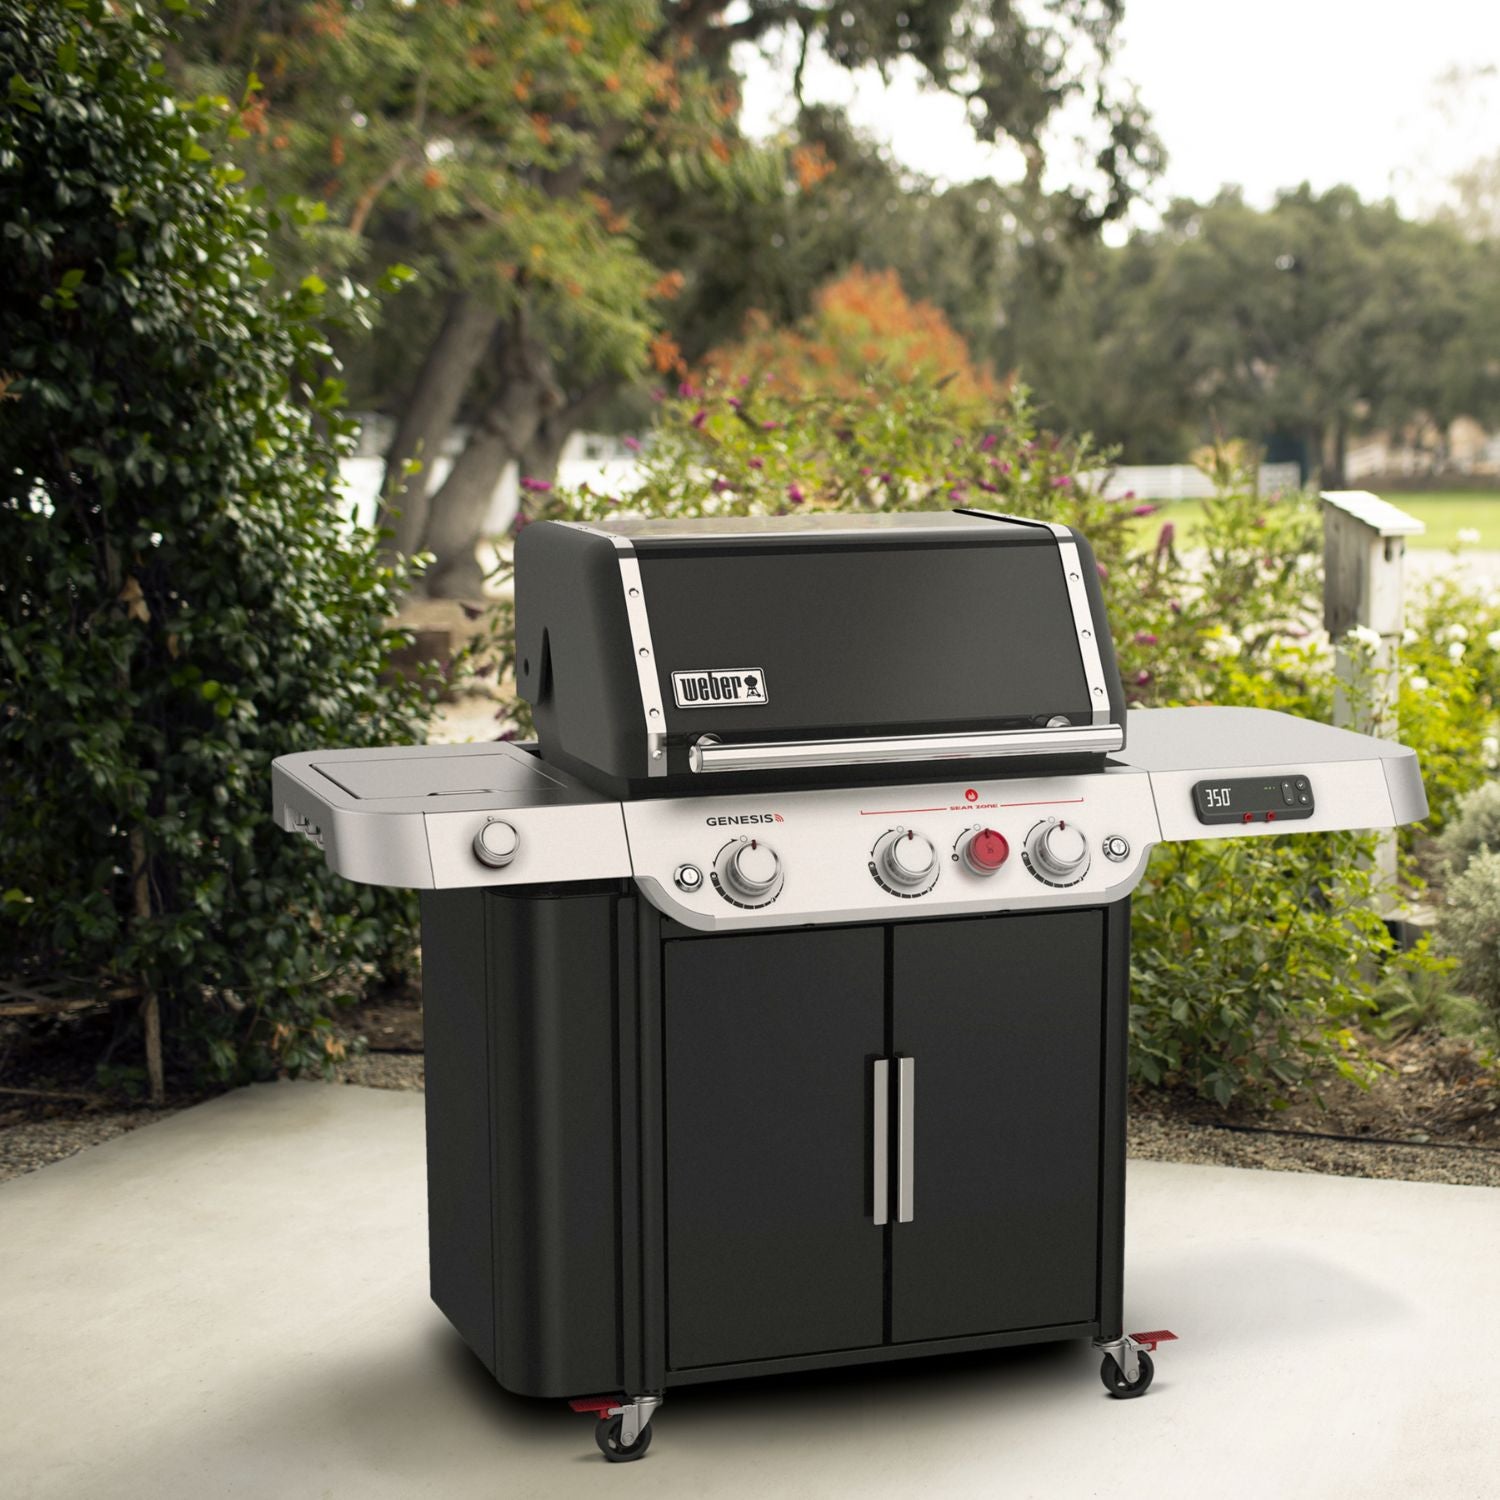 Types of Weber Grills The Ultimate Guide to Weber Grills Gas, Charcoal, and Electric Options